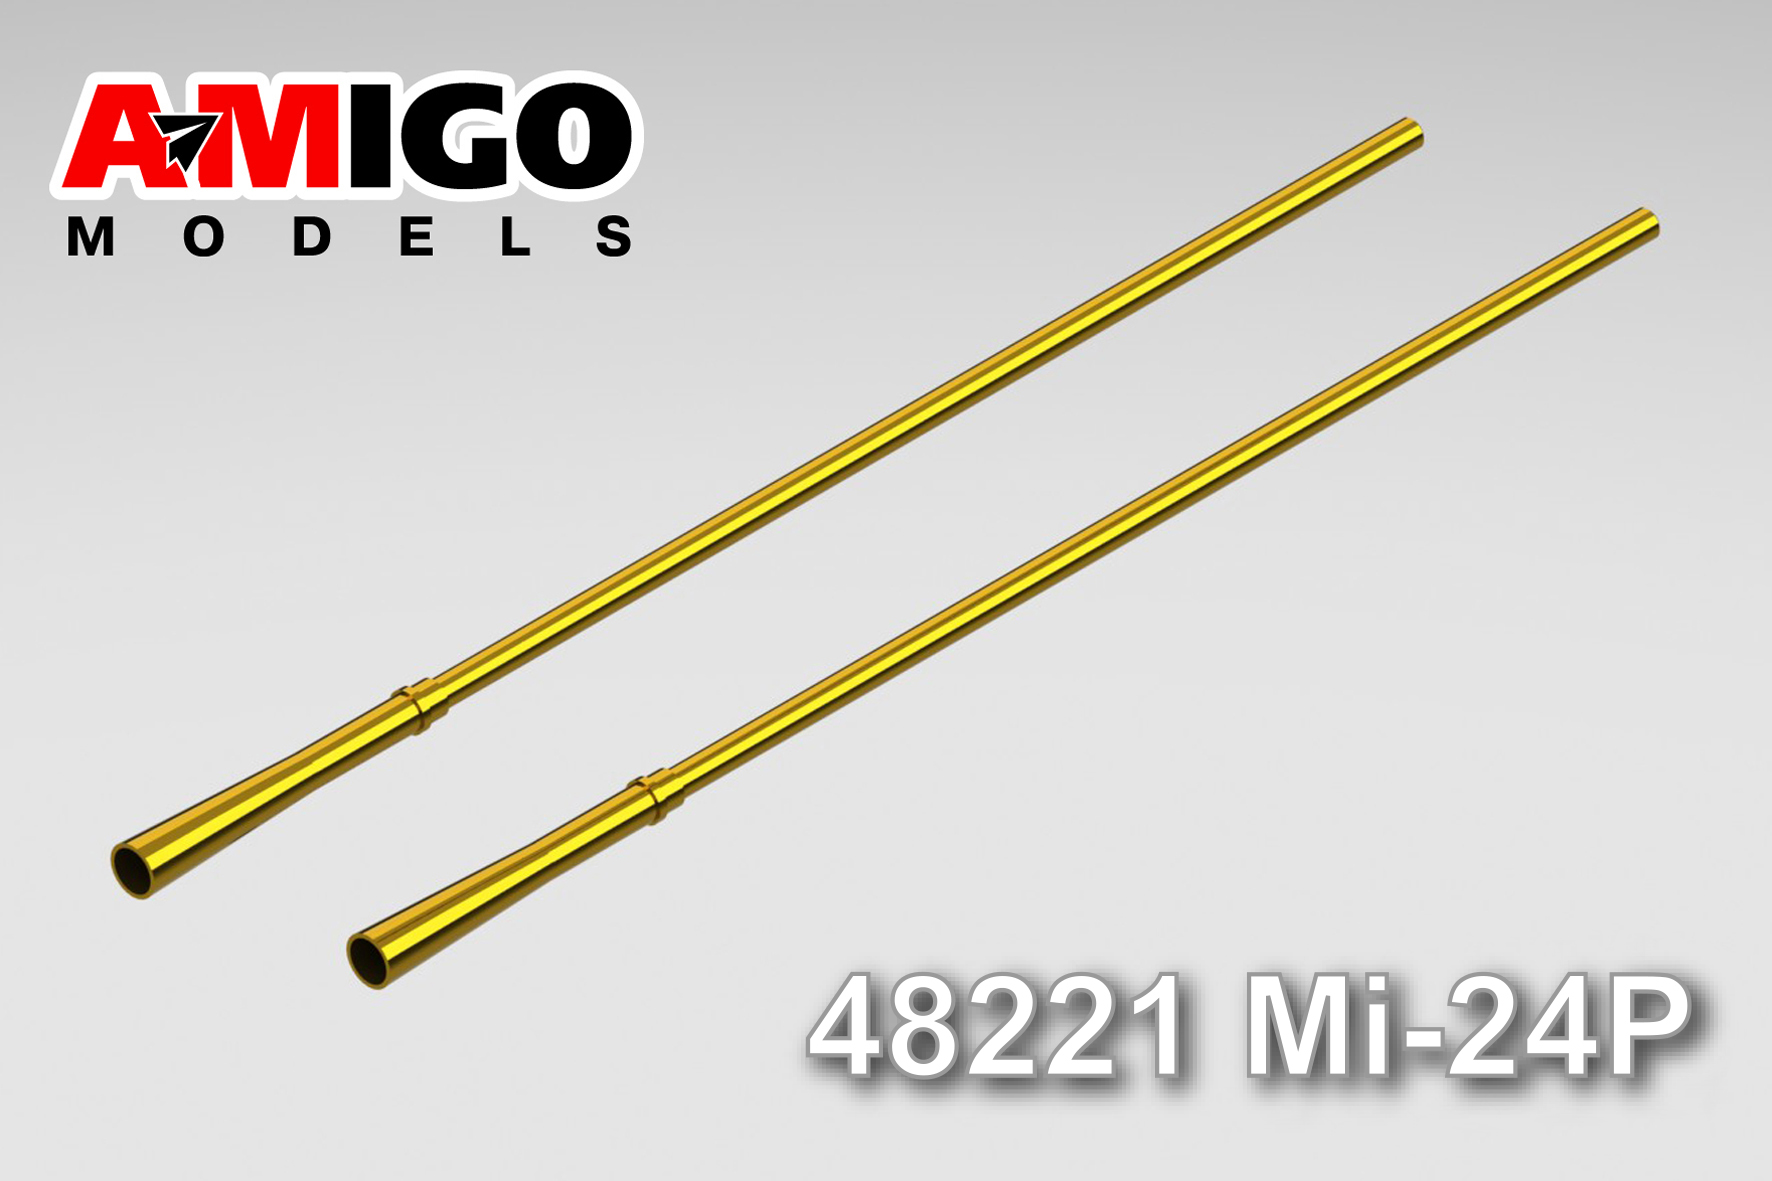 Aircraft detailing sets (brass) 1/48 GSh-30K air cannon barrels of Mi-24P helicopter (Amigo Models)